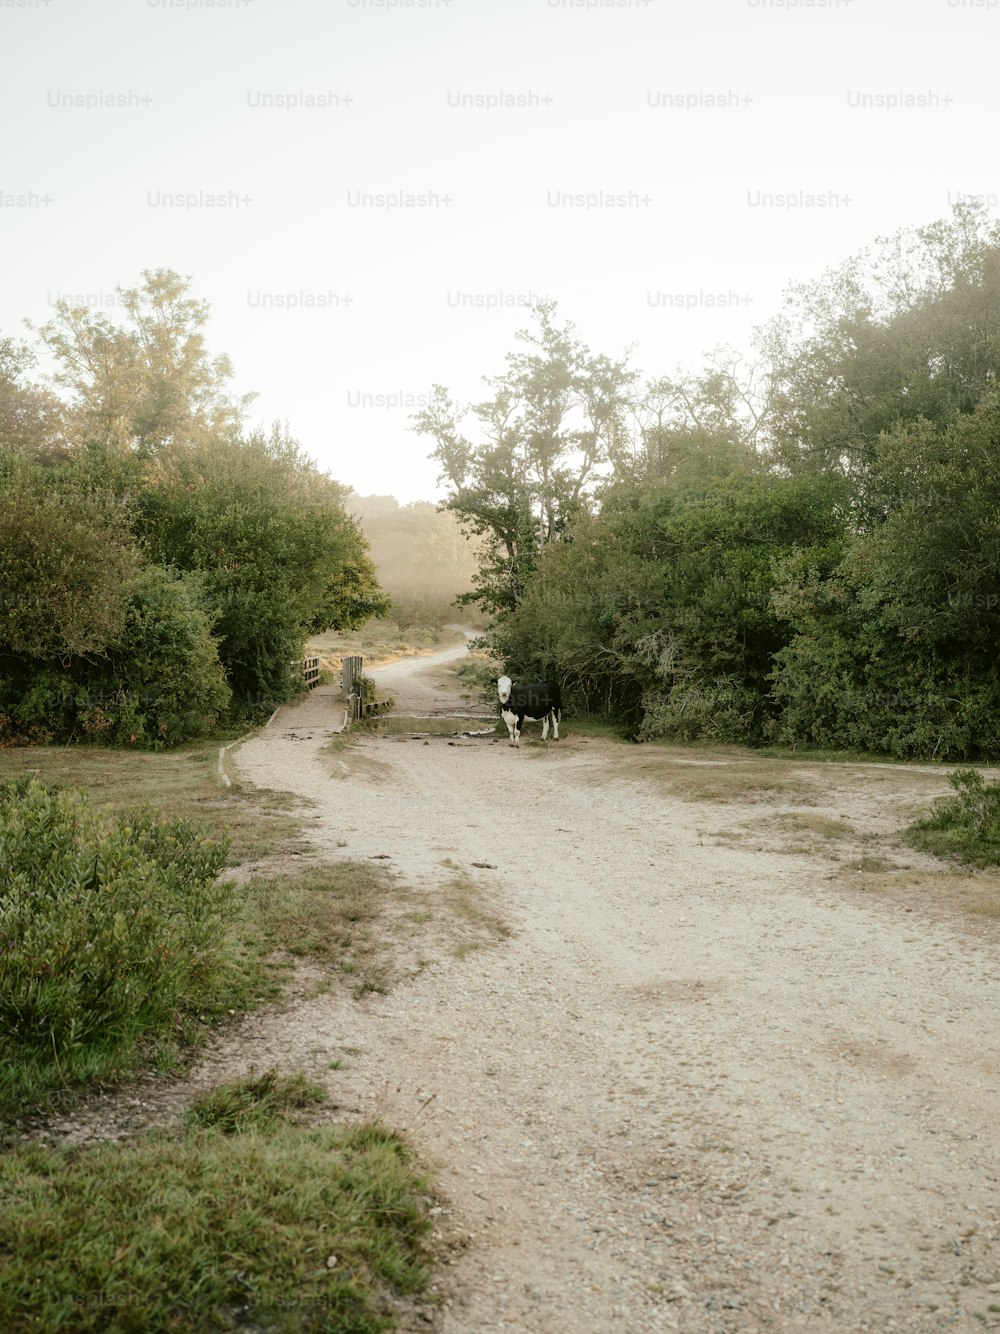 a couple of cows walking down a dirt road